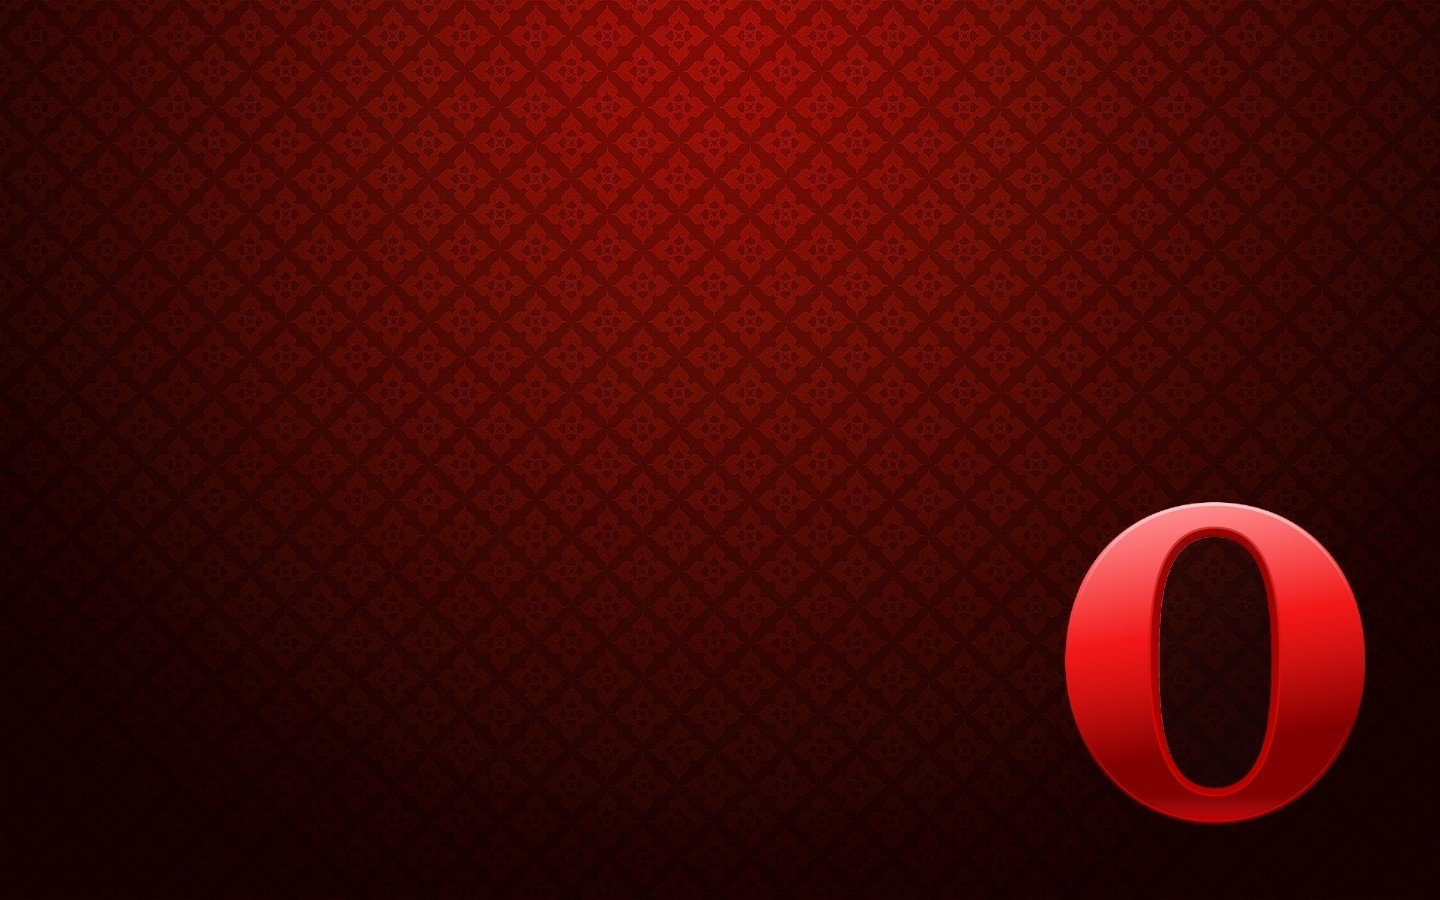 color background for google in opera browser download